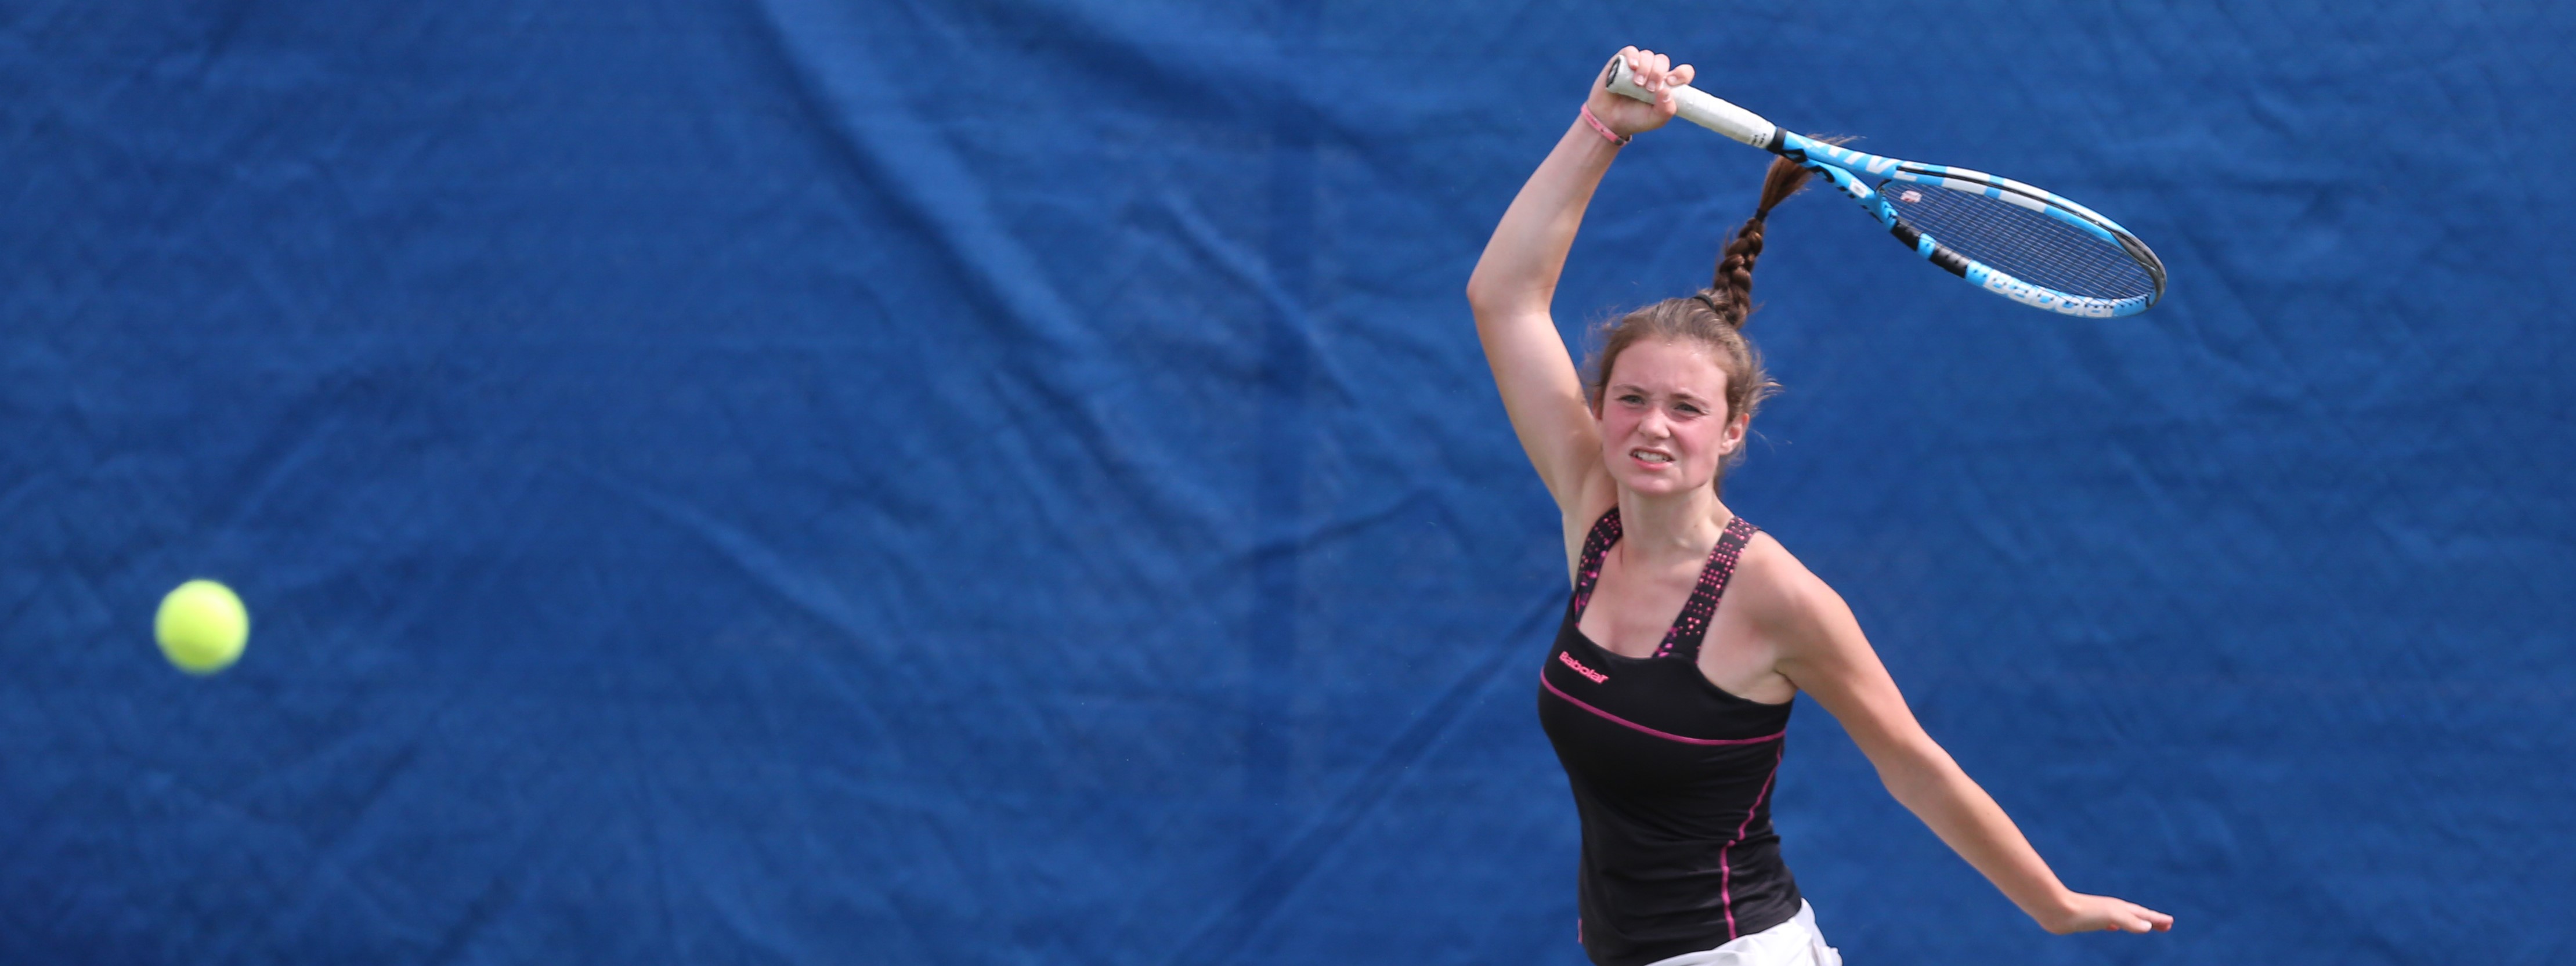 A girl hitting a forehand shot on court